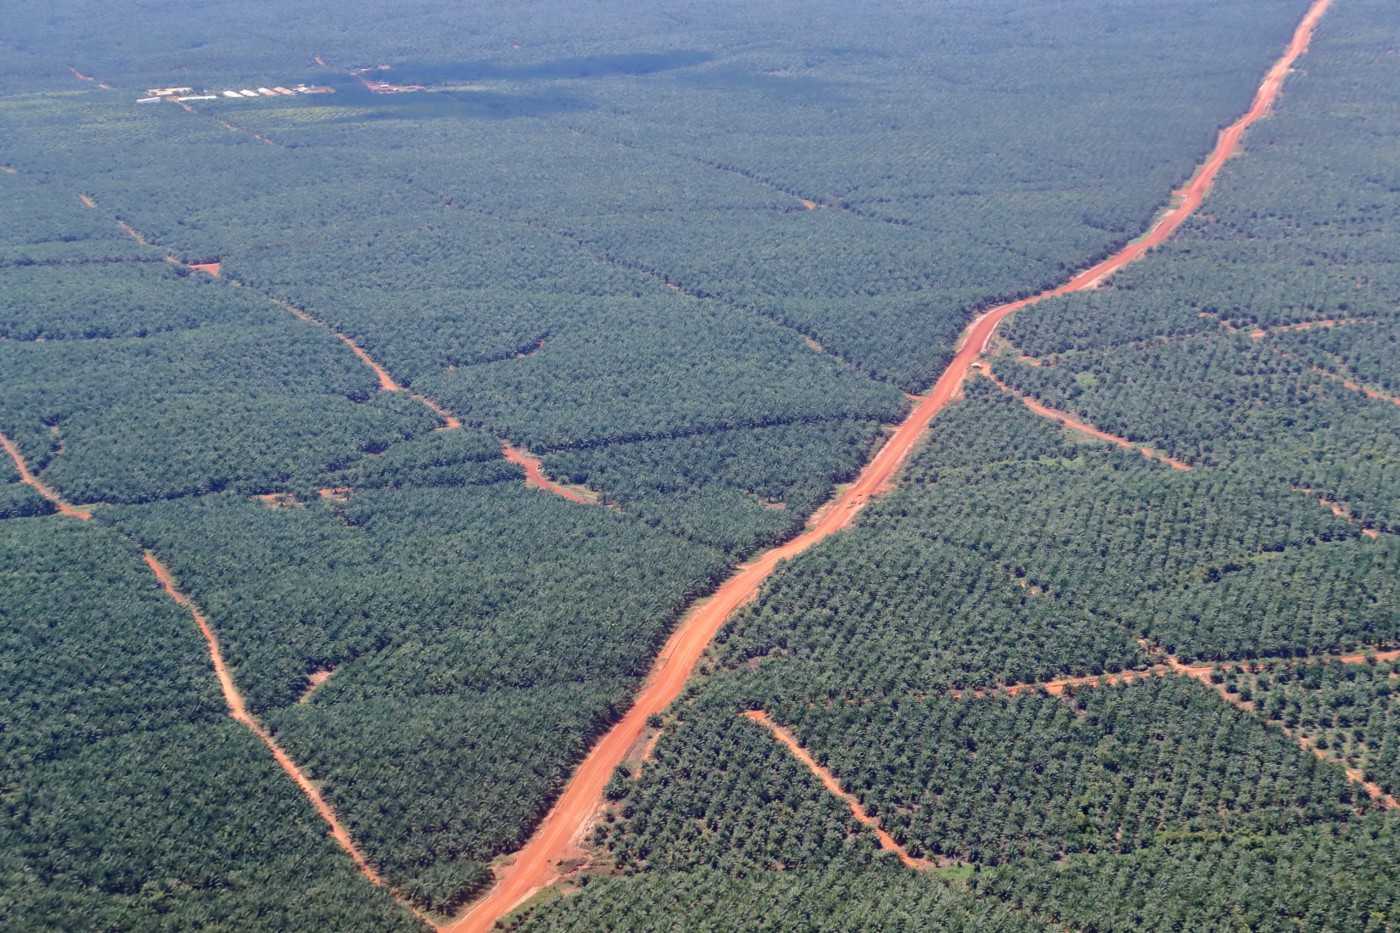 One of Korindo’s oil palm plantations in Papua, February 2020.